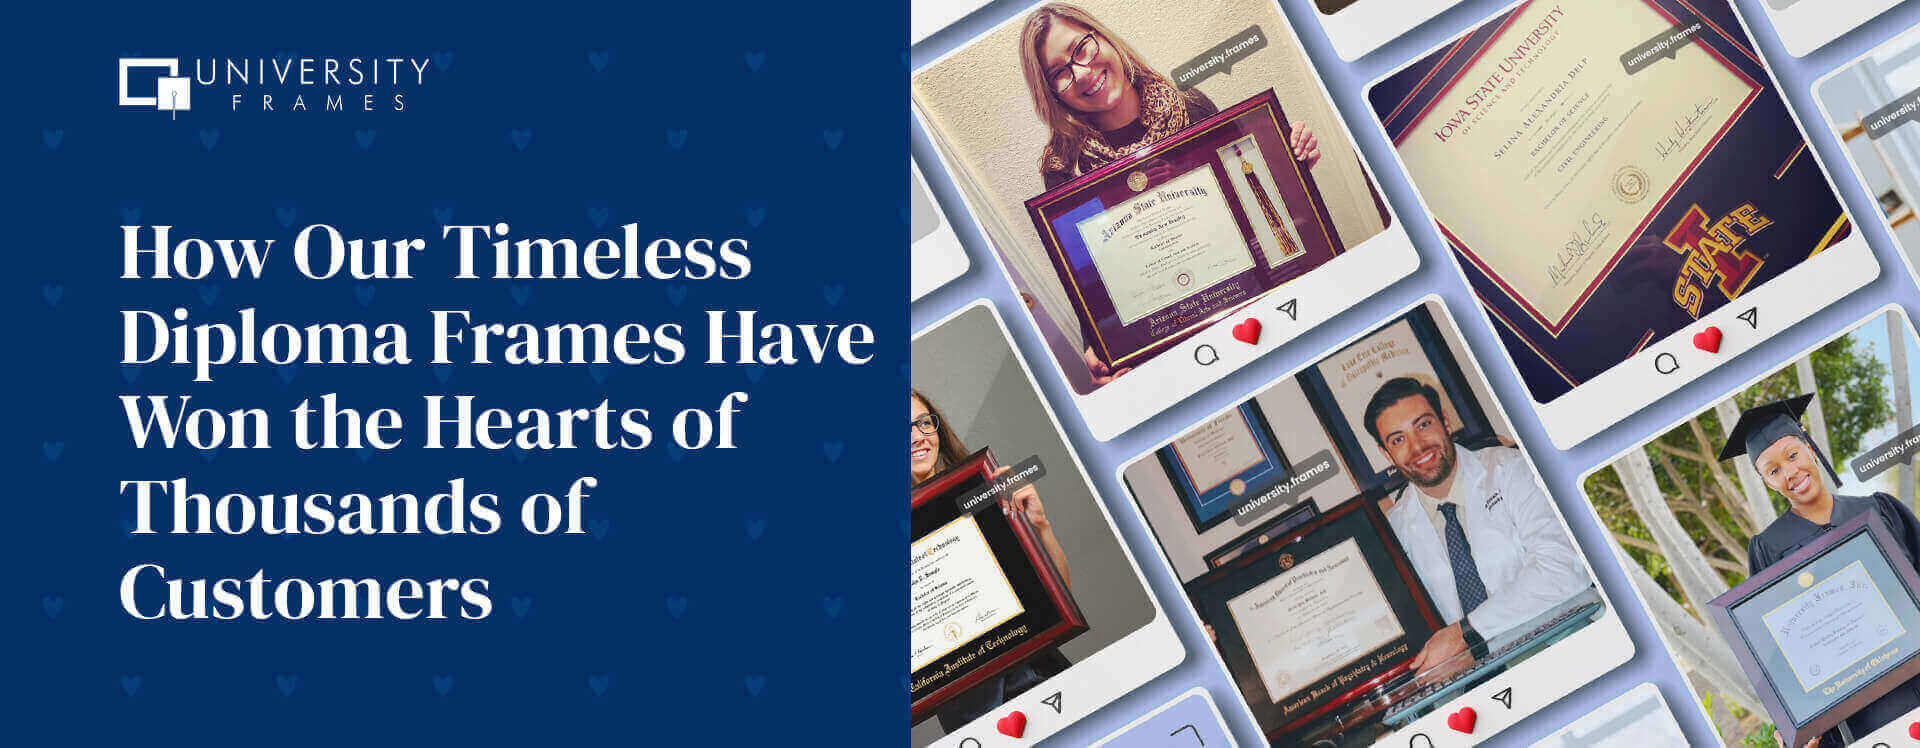 How Our Timeless Diploma Frames Have Won the Hearts of Thousands of Customers